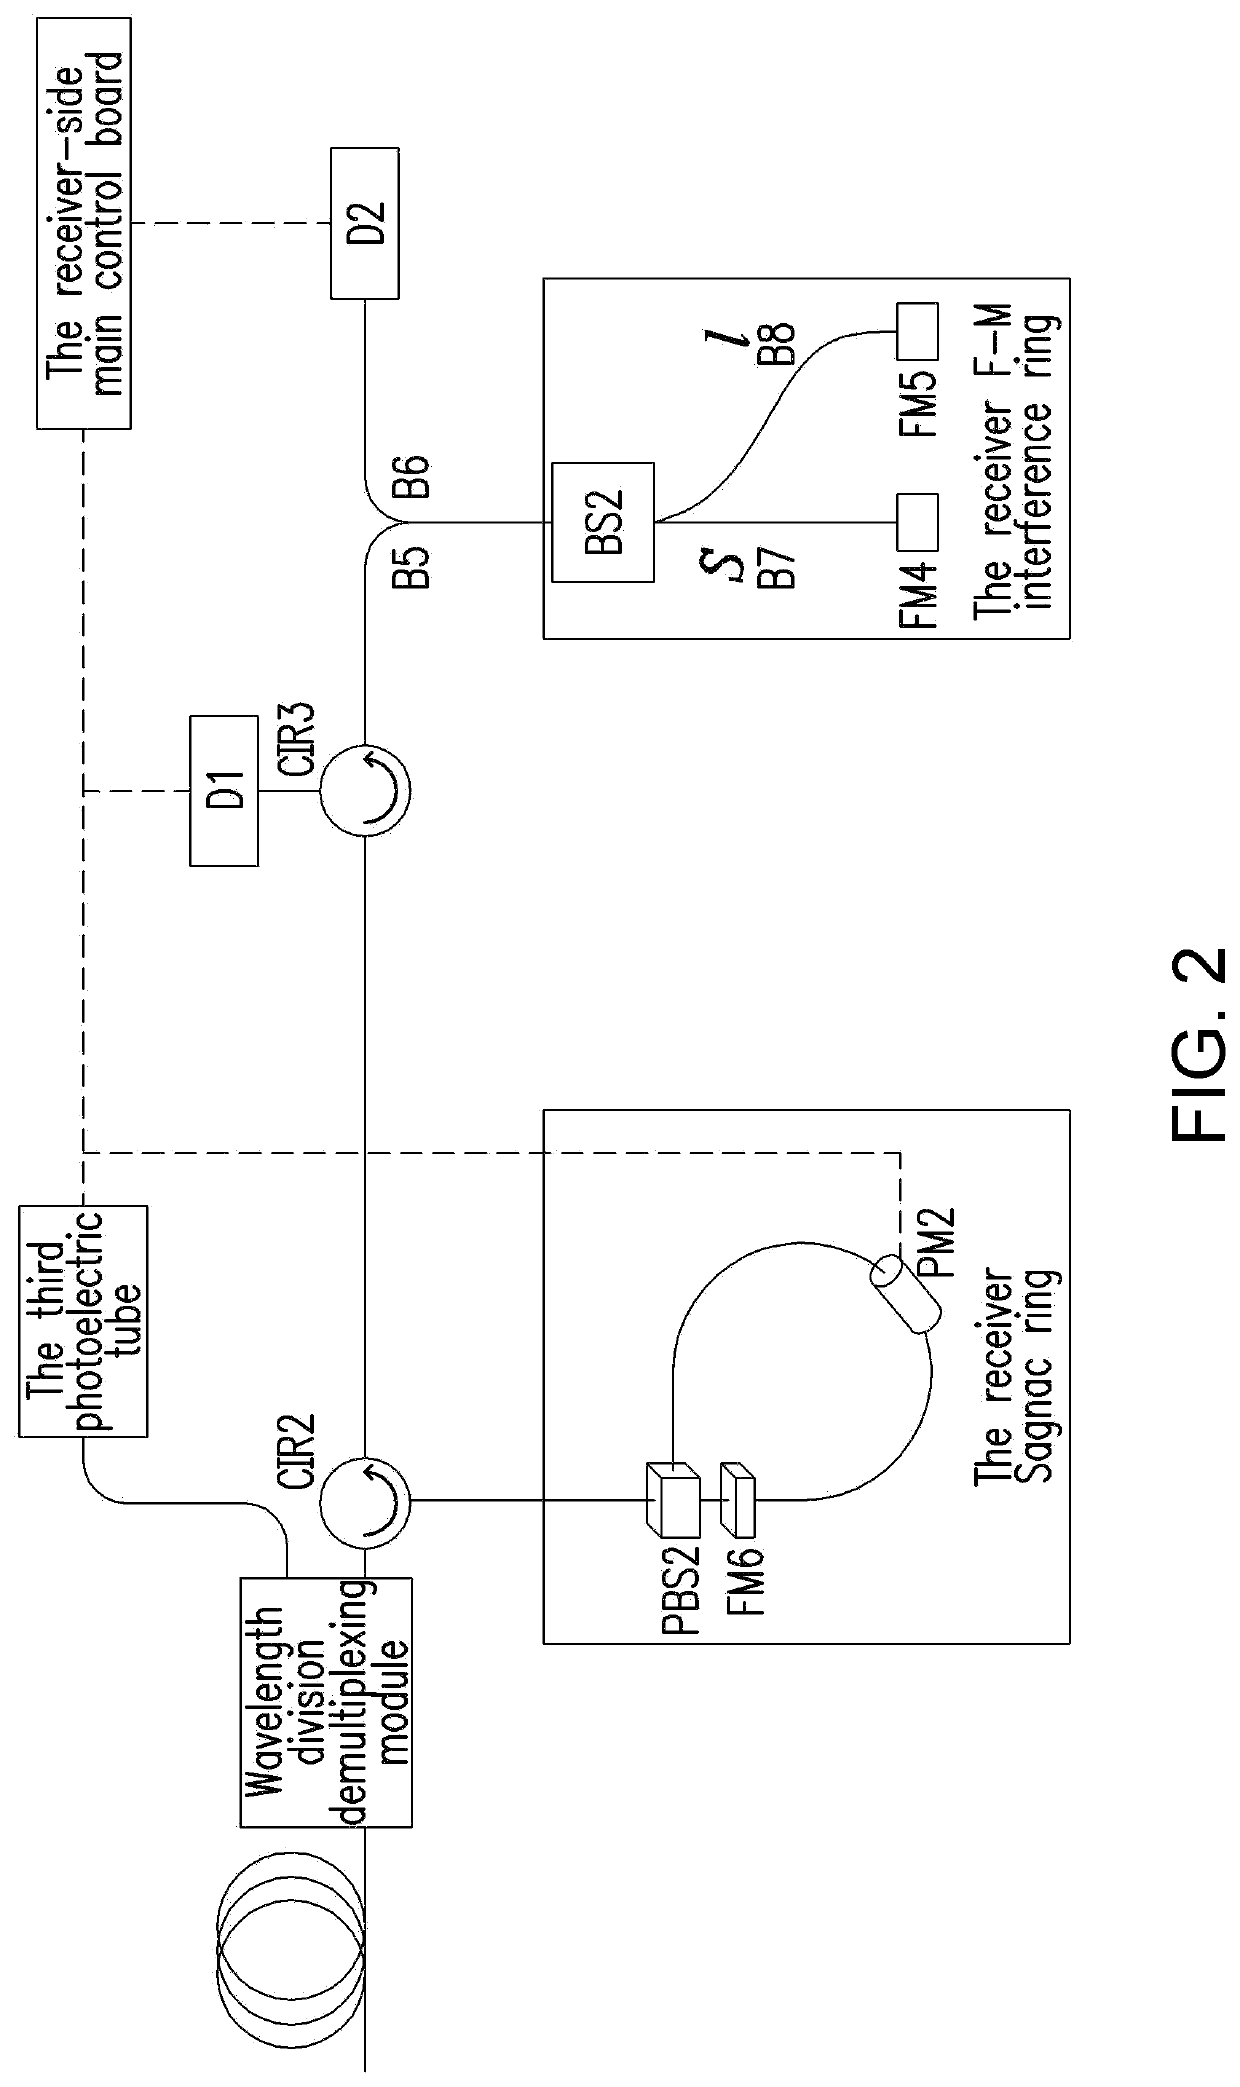 Quantum key distribution device capable of being configured with multiple protocols